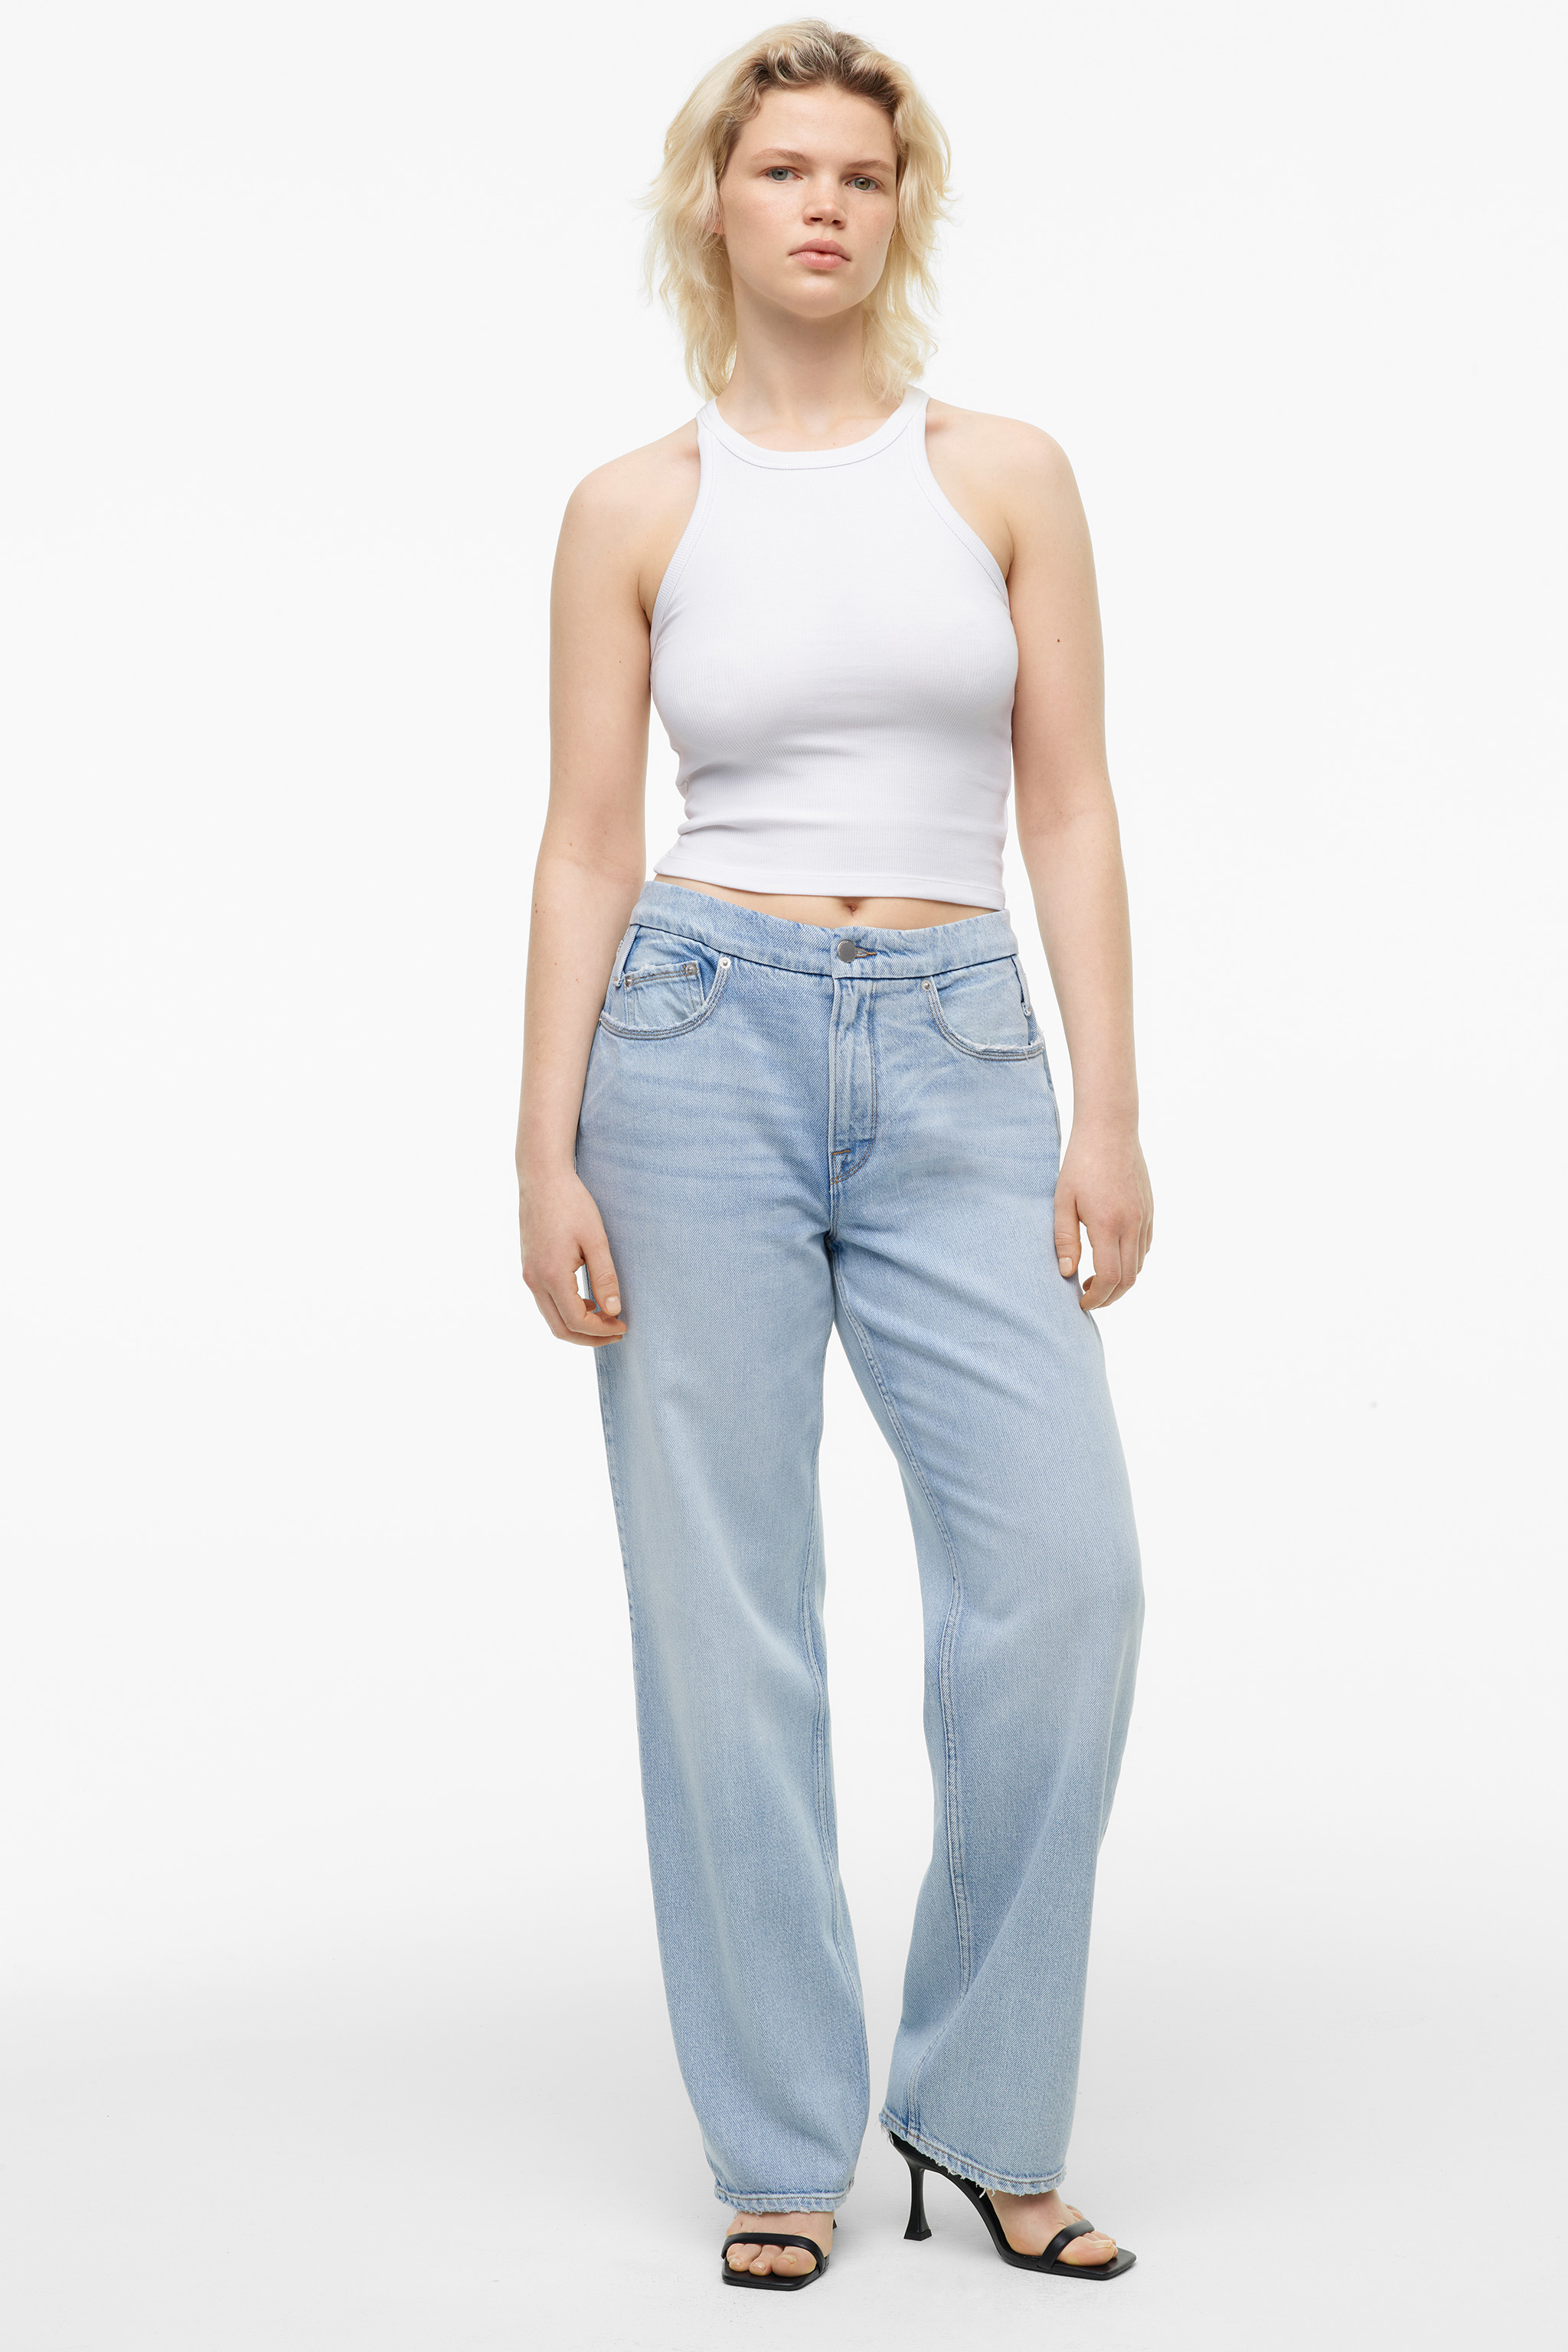 Zara and Good American Announce Denim Jeans Collaboration